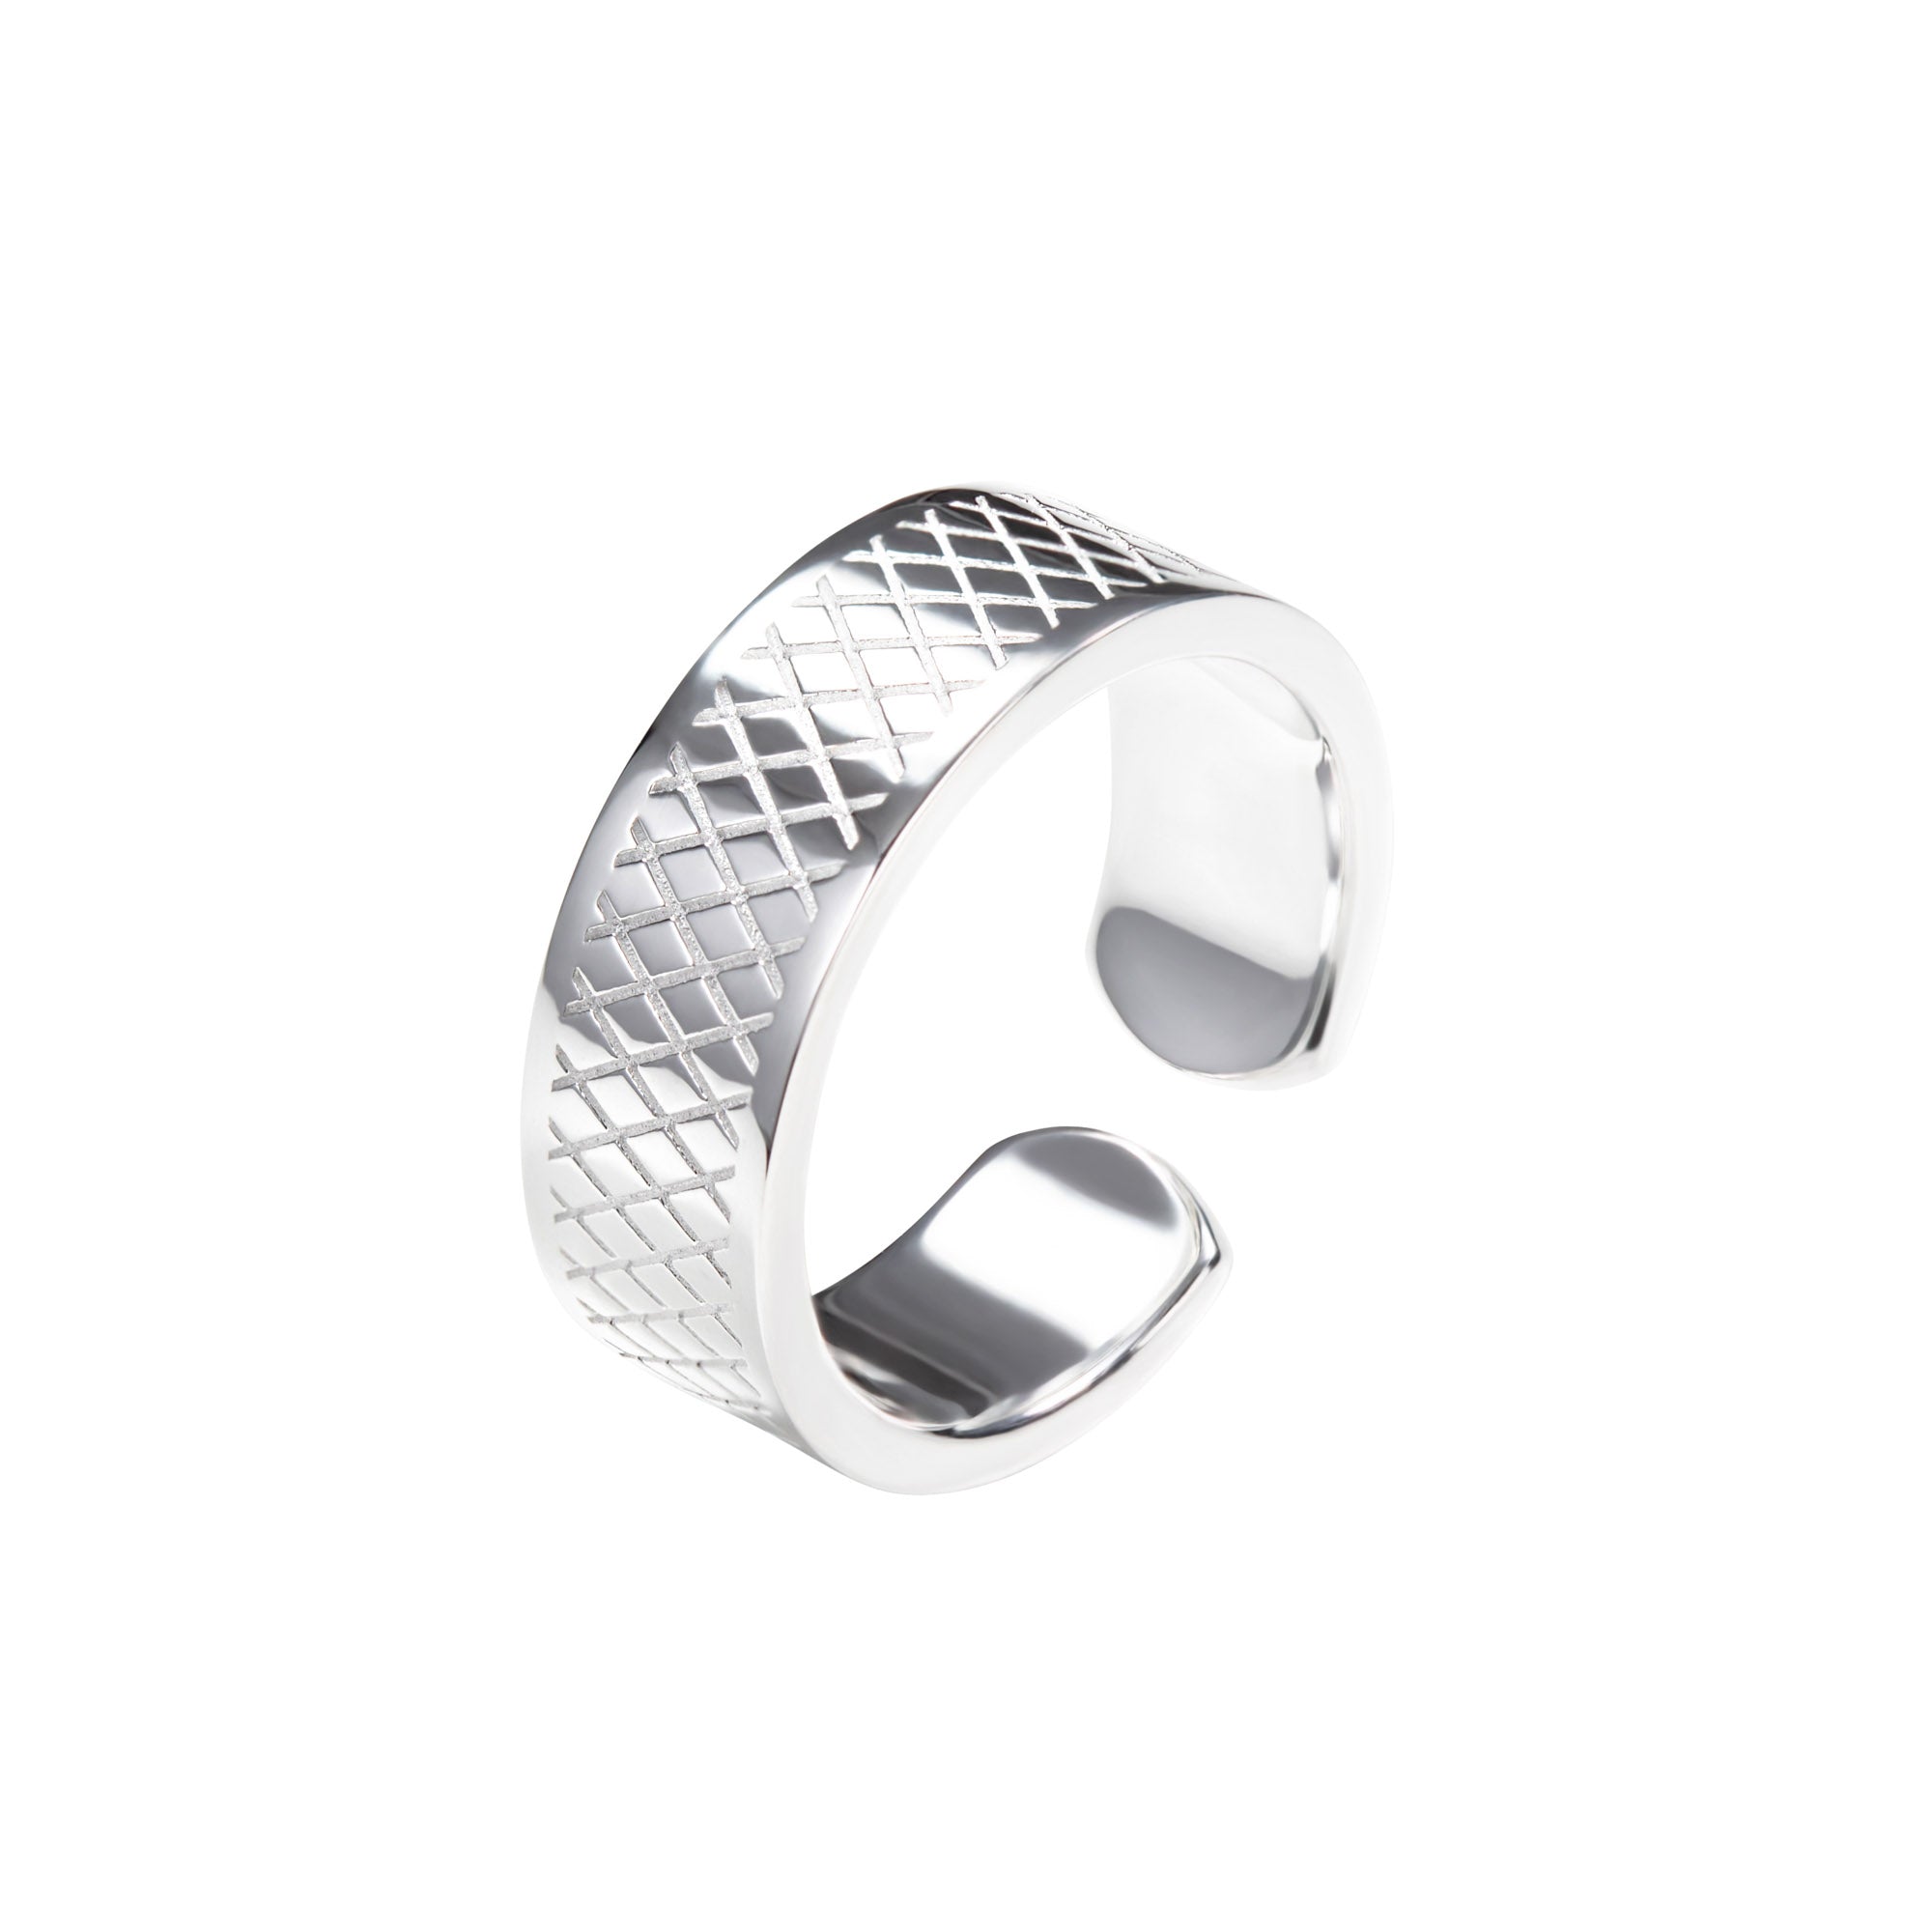 Traditioneller Ring ✘ Vielring - 925 Silber